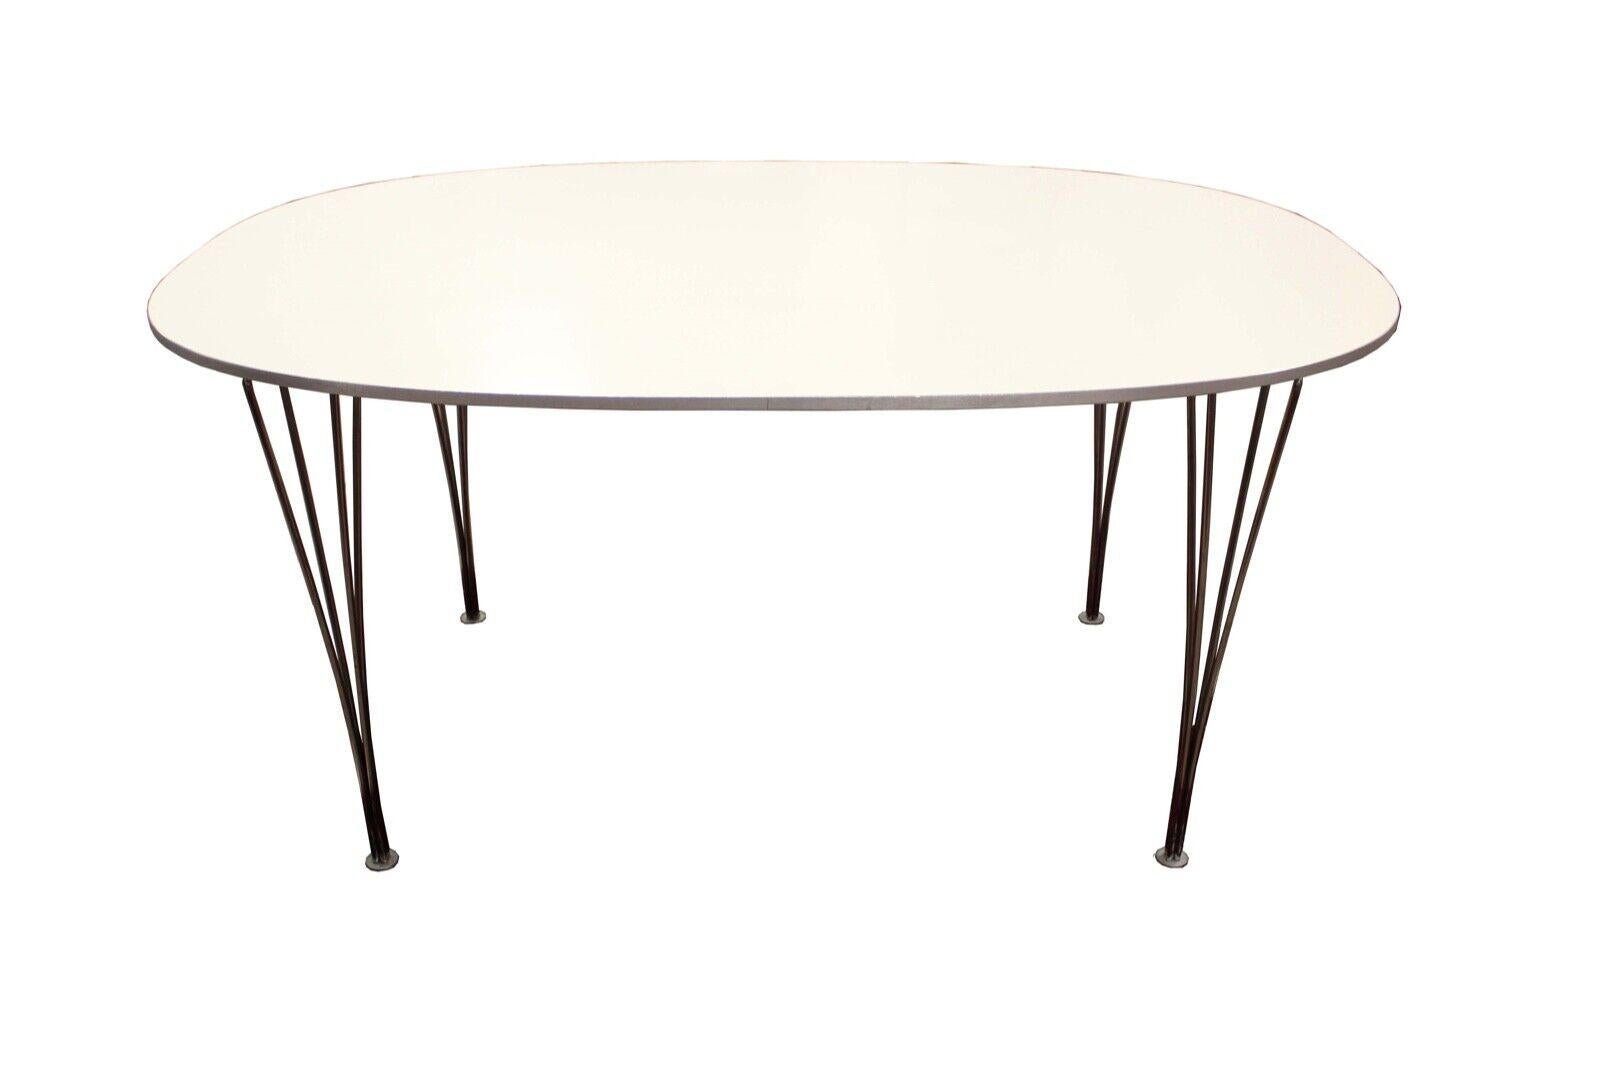 Le Shoppe Too presents an ellipse dining table with white laminate designed by Piet Hein and Arne Jacobsen, and manufactured by Fritz Hansen in 1998. In very good condition. Dimensions: 59